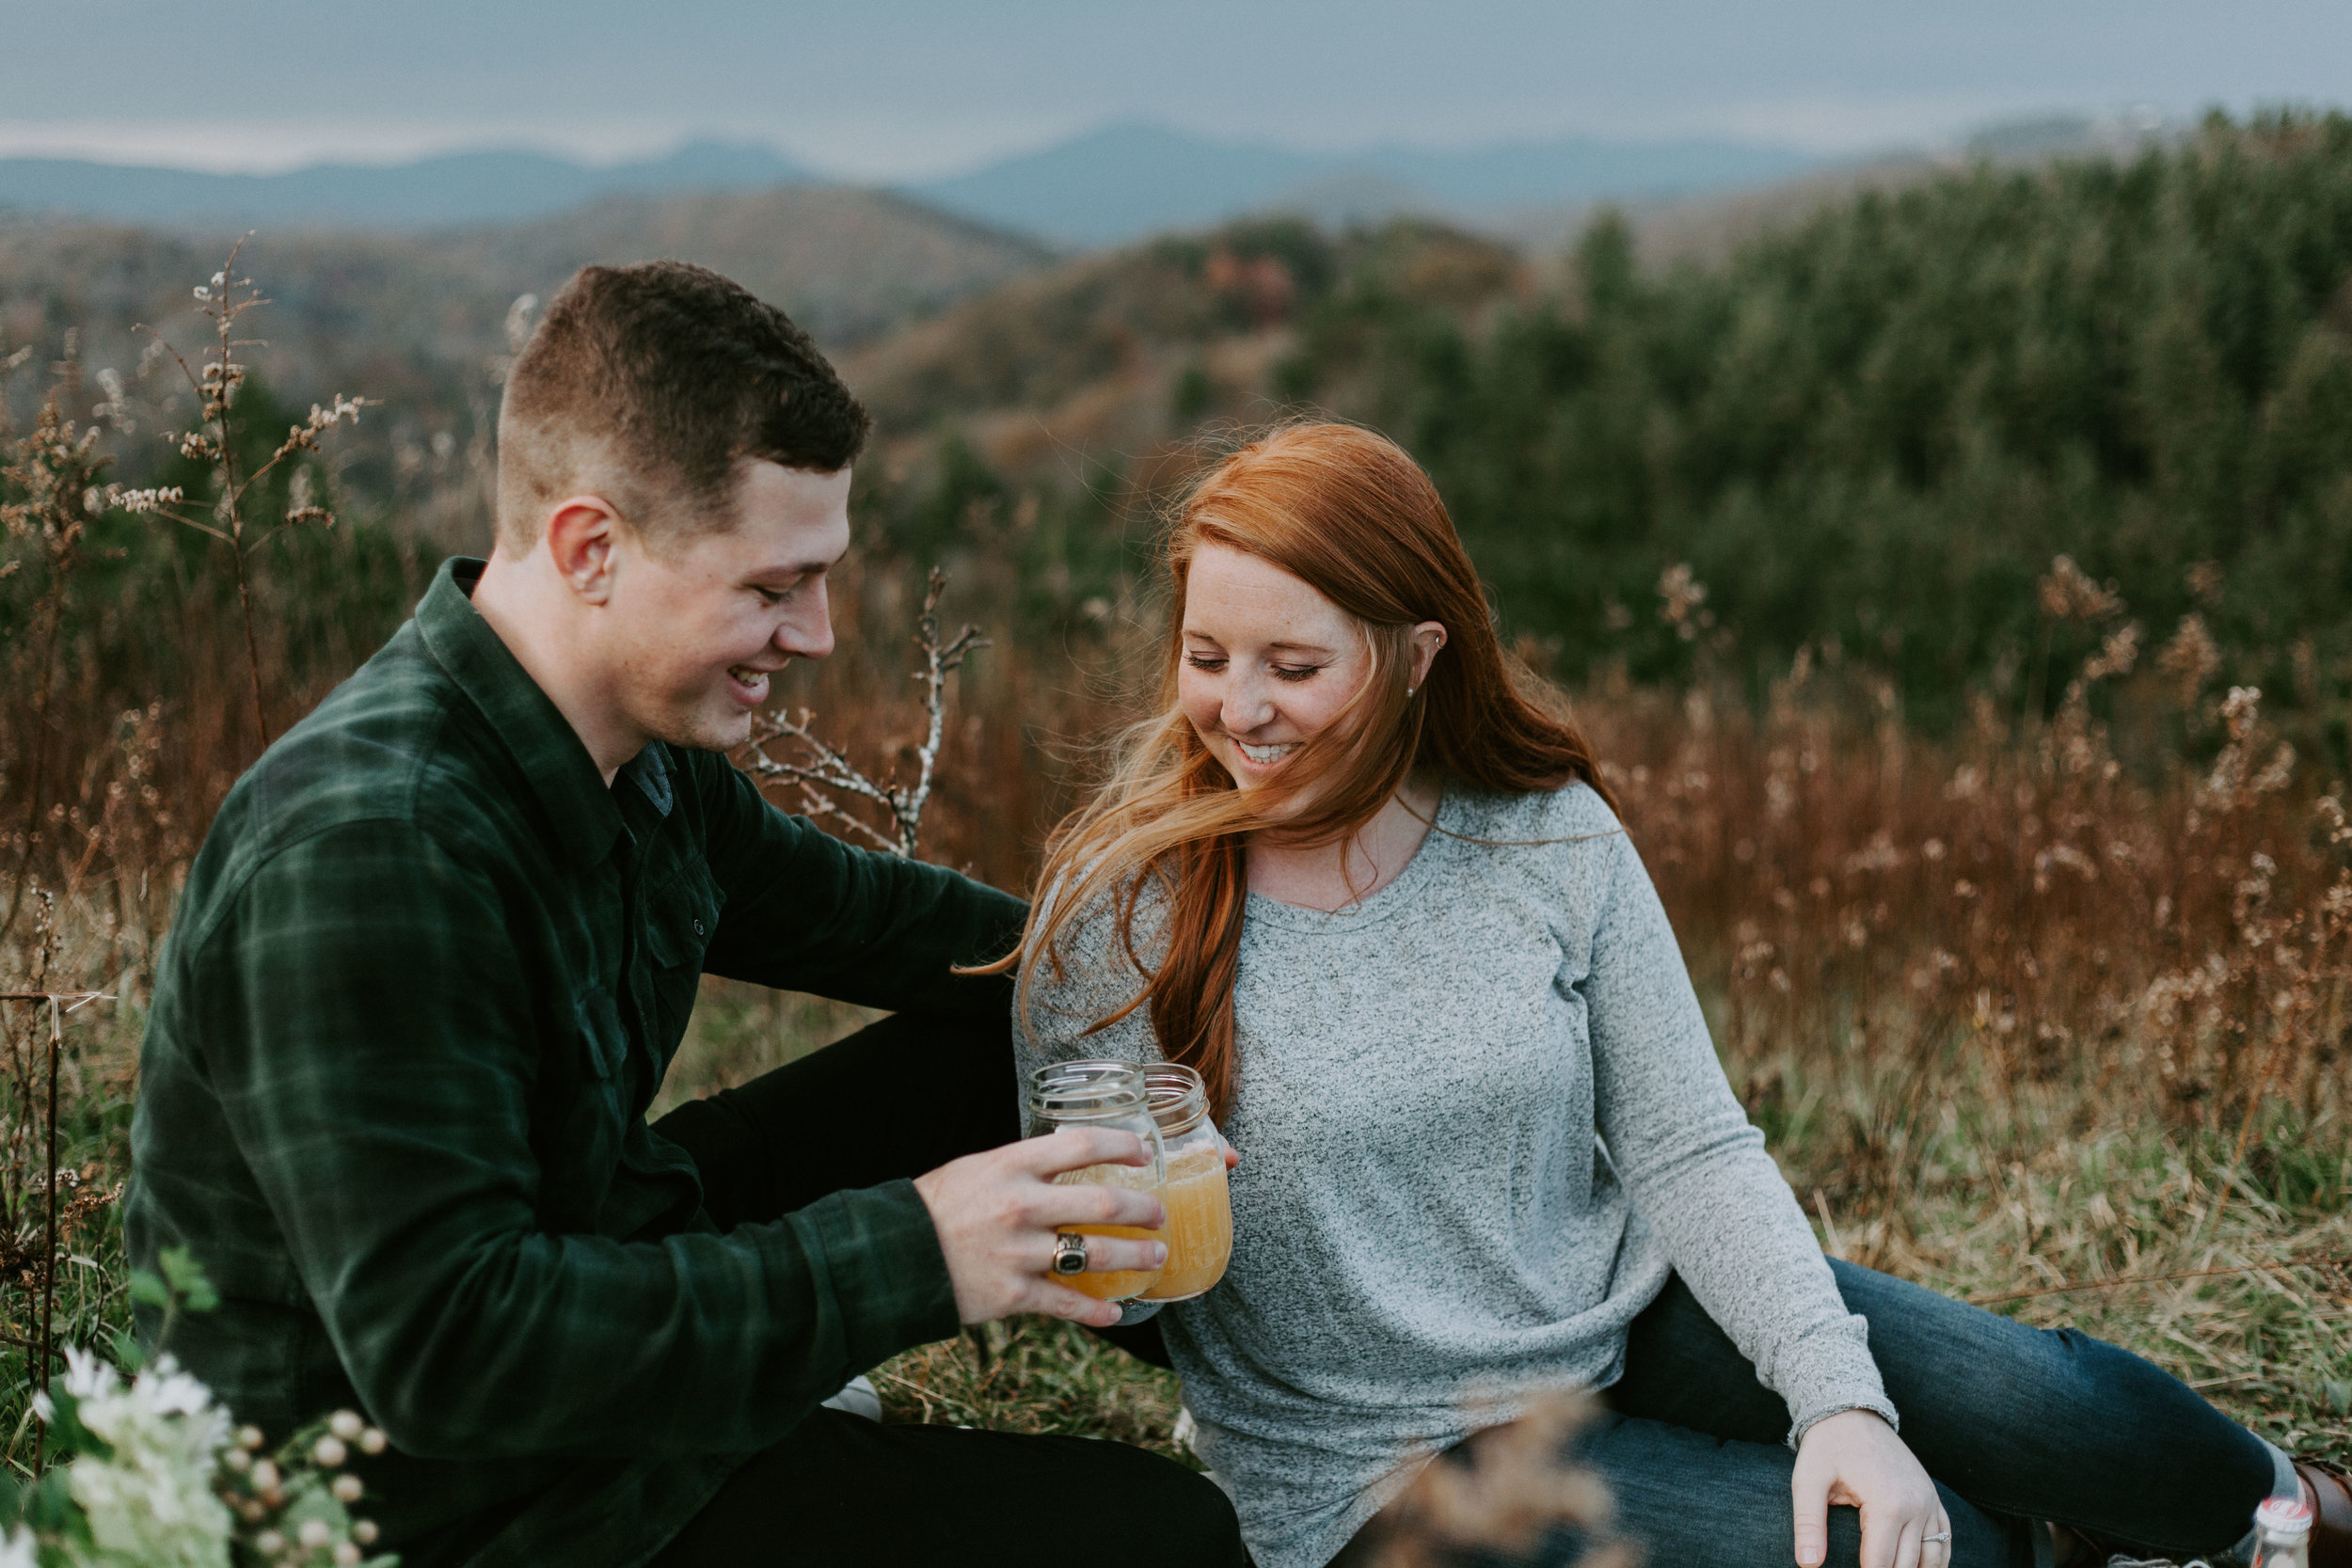 Mountain_Top_Picnic_Engagement_Session_013.jpg